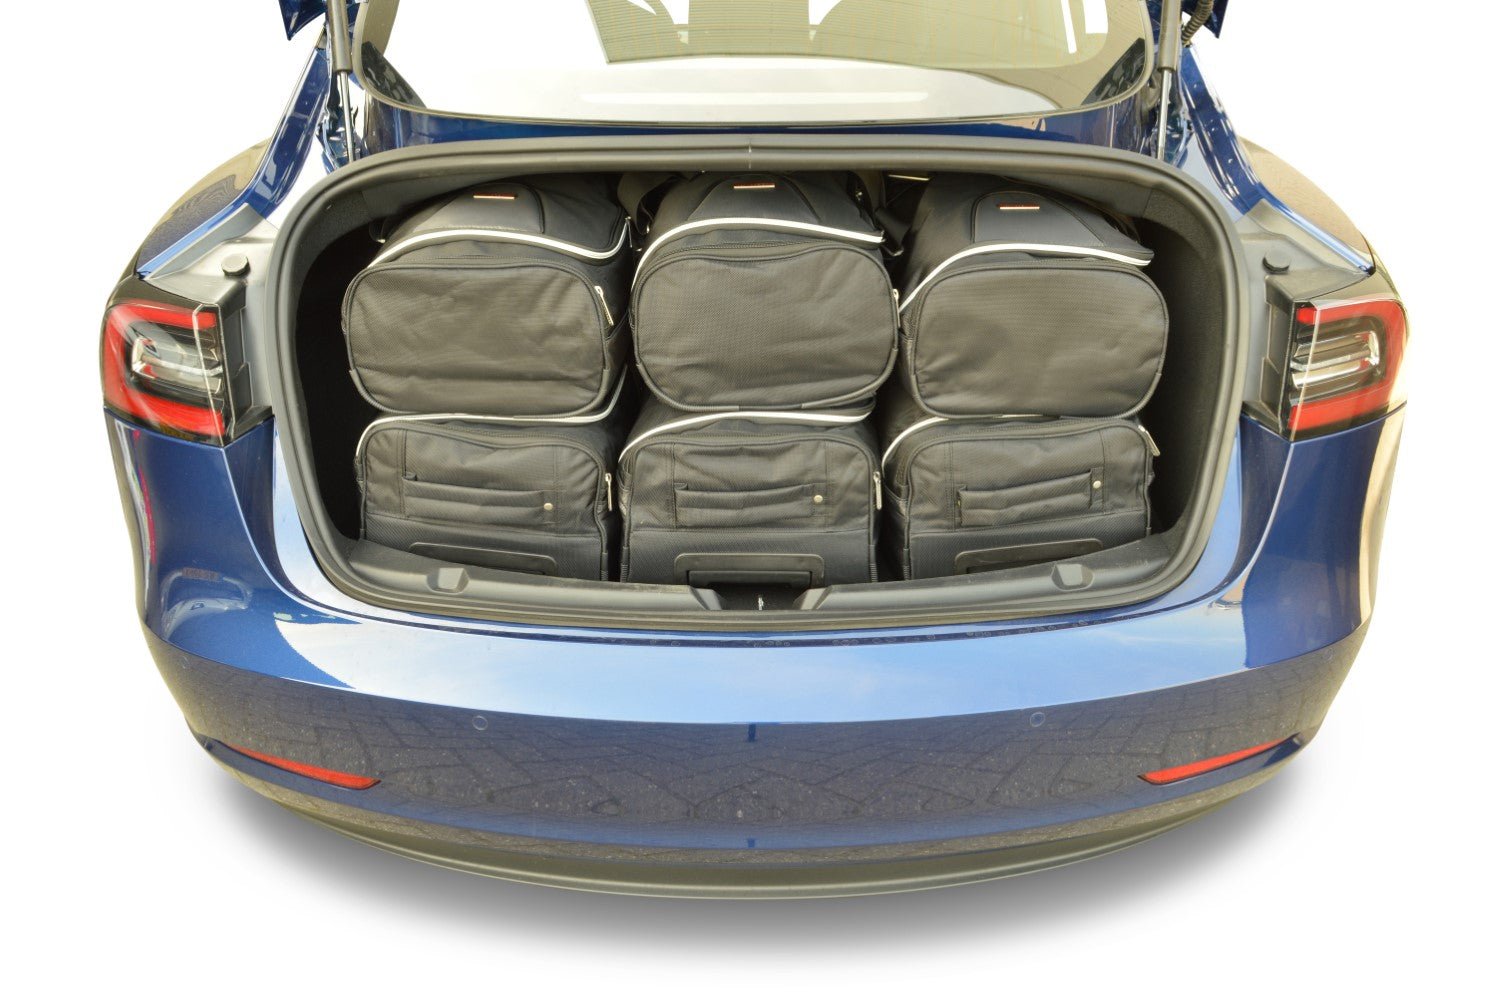 CarBags trunk bag set for the Tesla Model 3